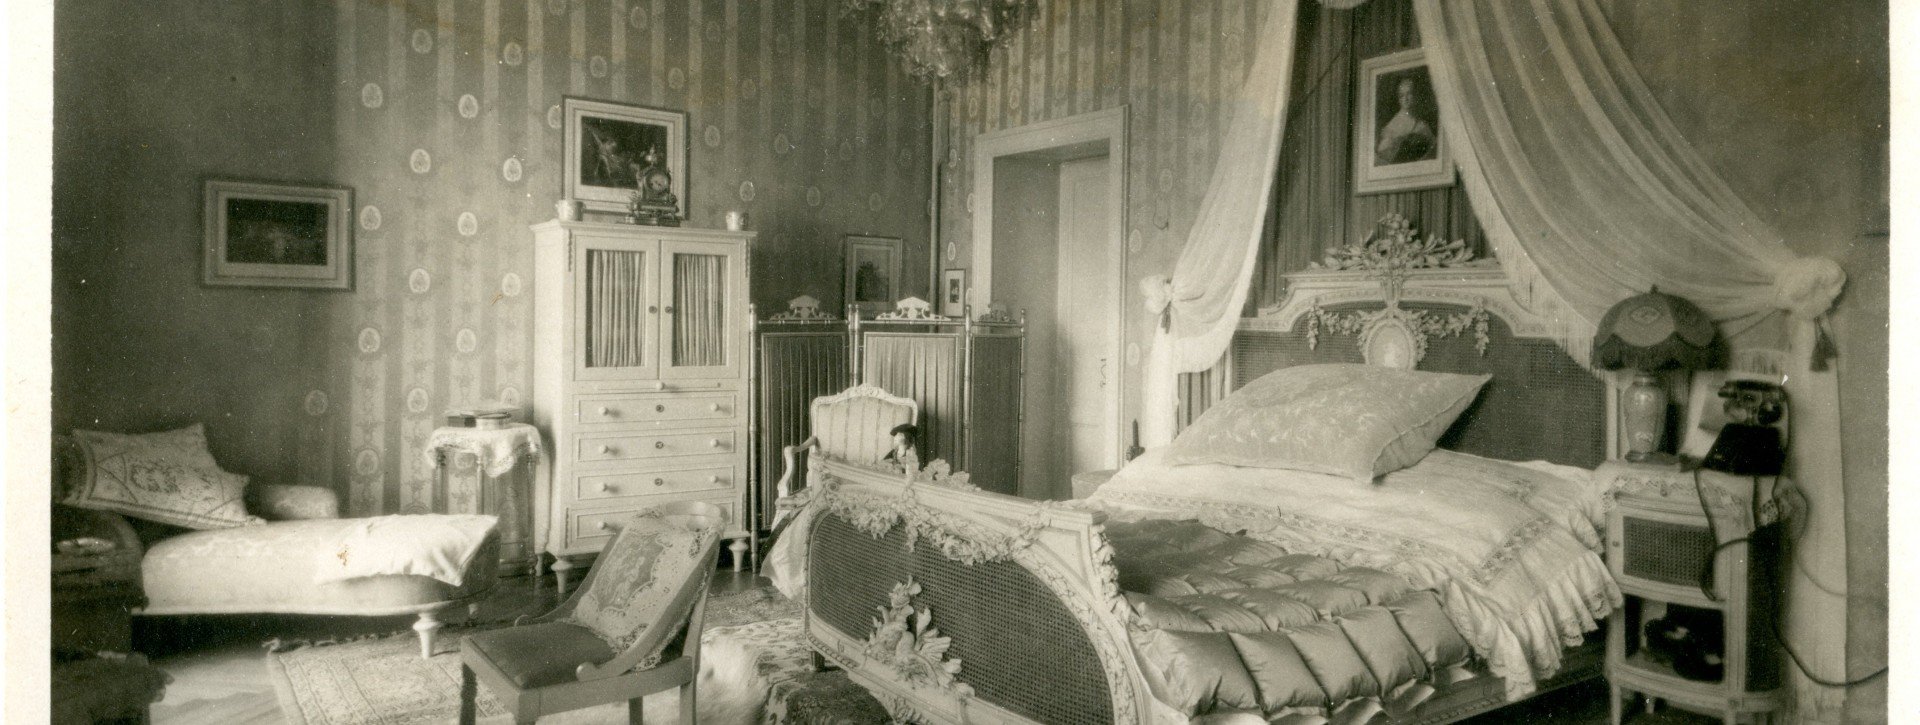 Historic picture of a room with canopy bed